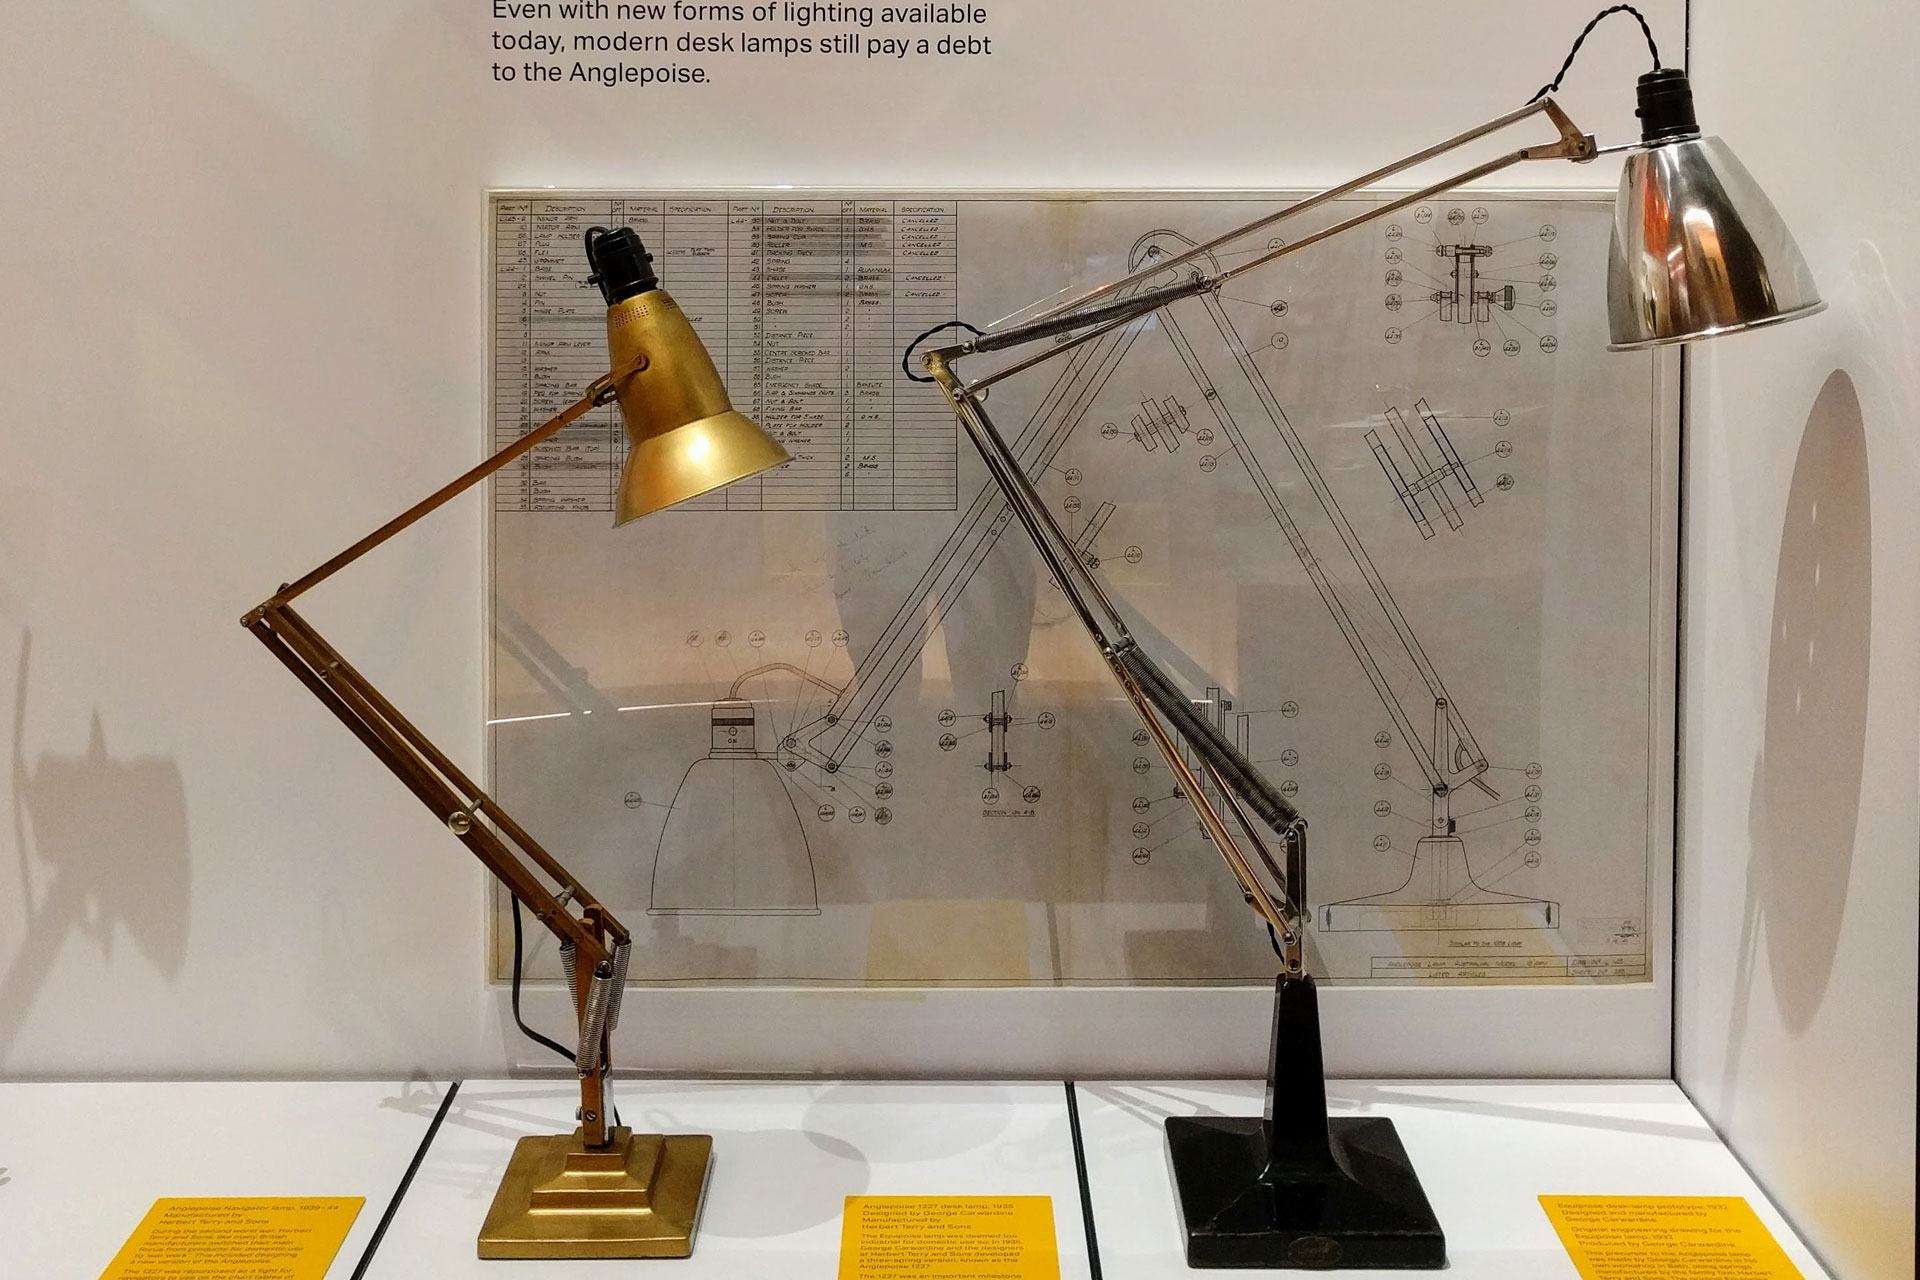 Anglepoise lamps